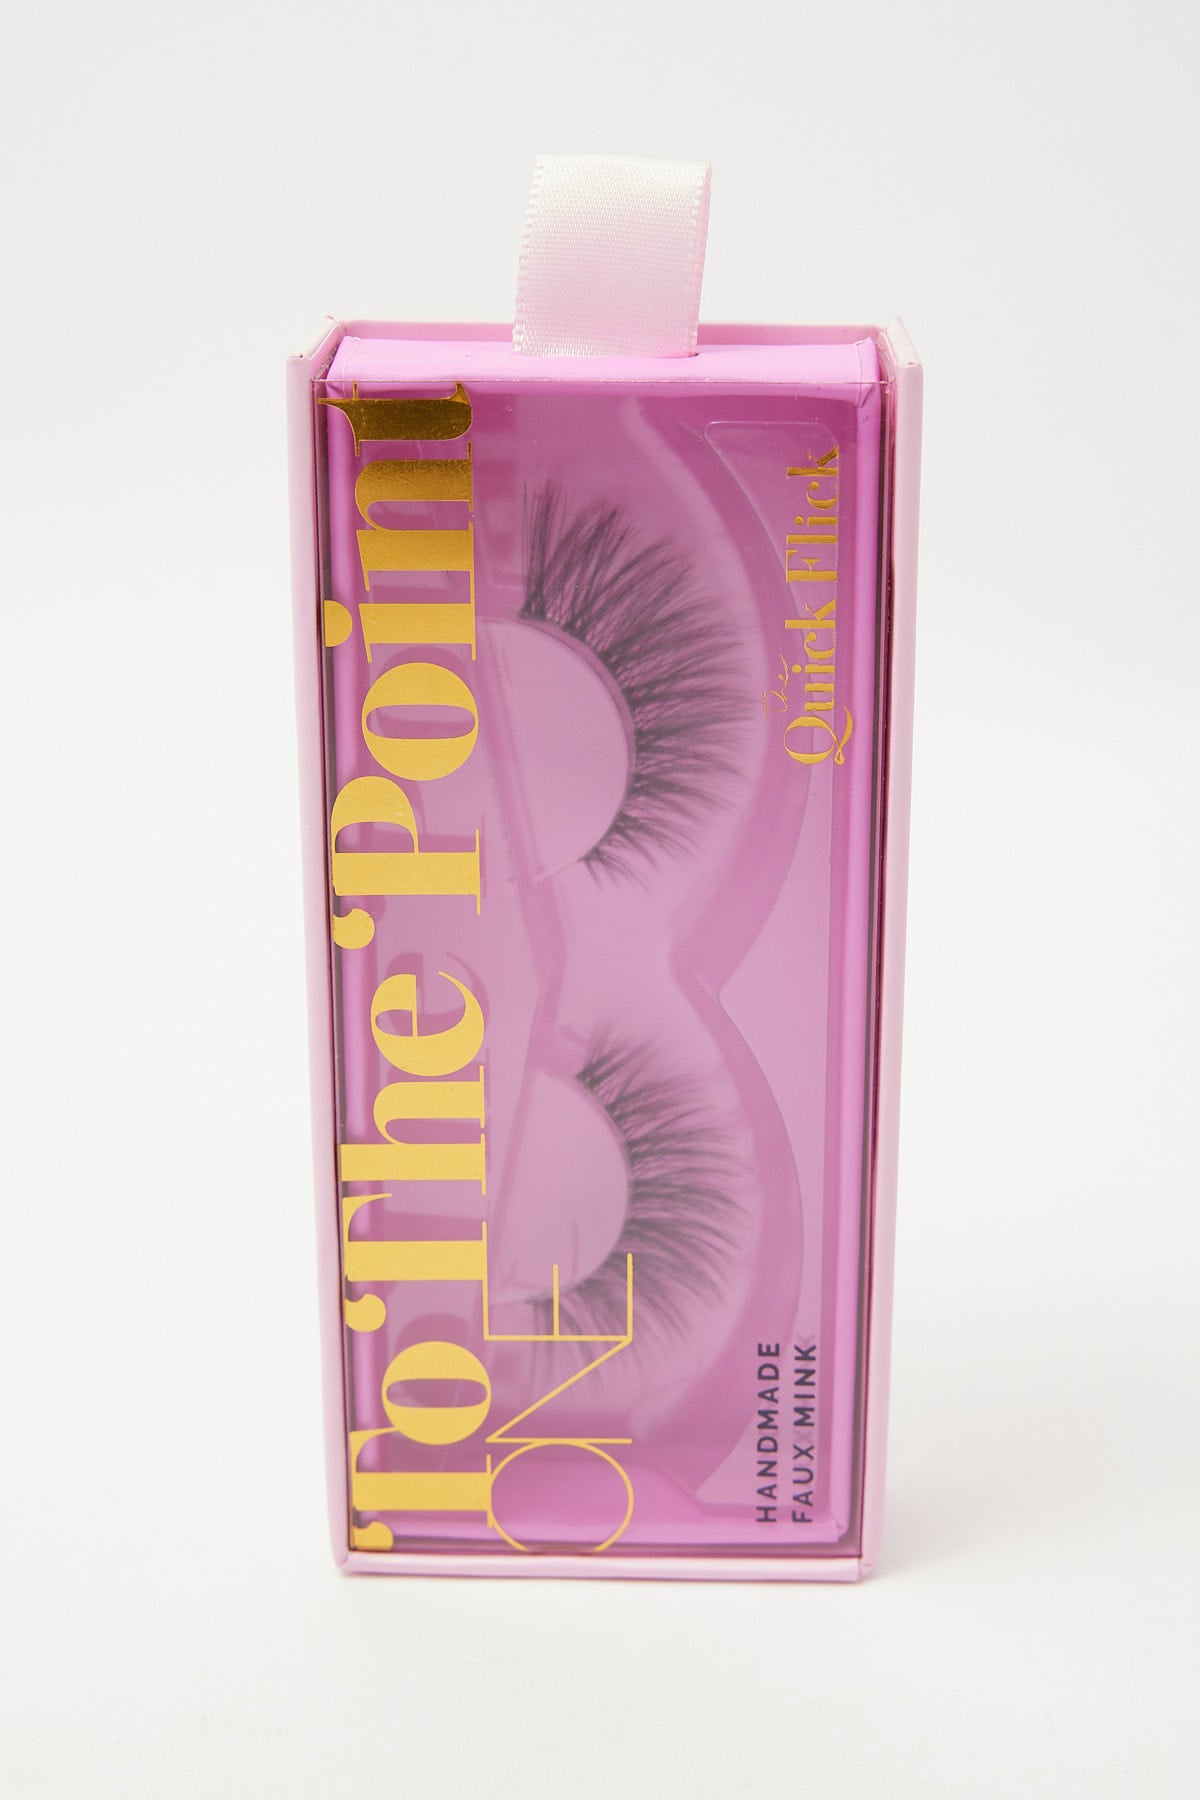 The Quick Flick Quick Lash To The Point One Clear Band / Black Lash